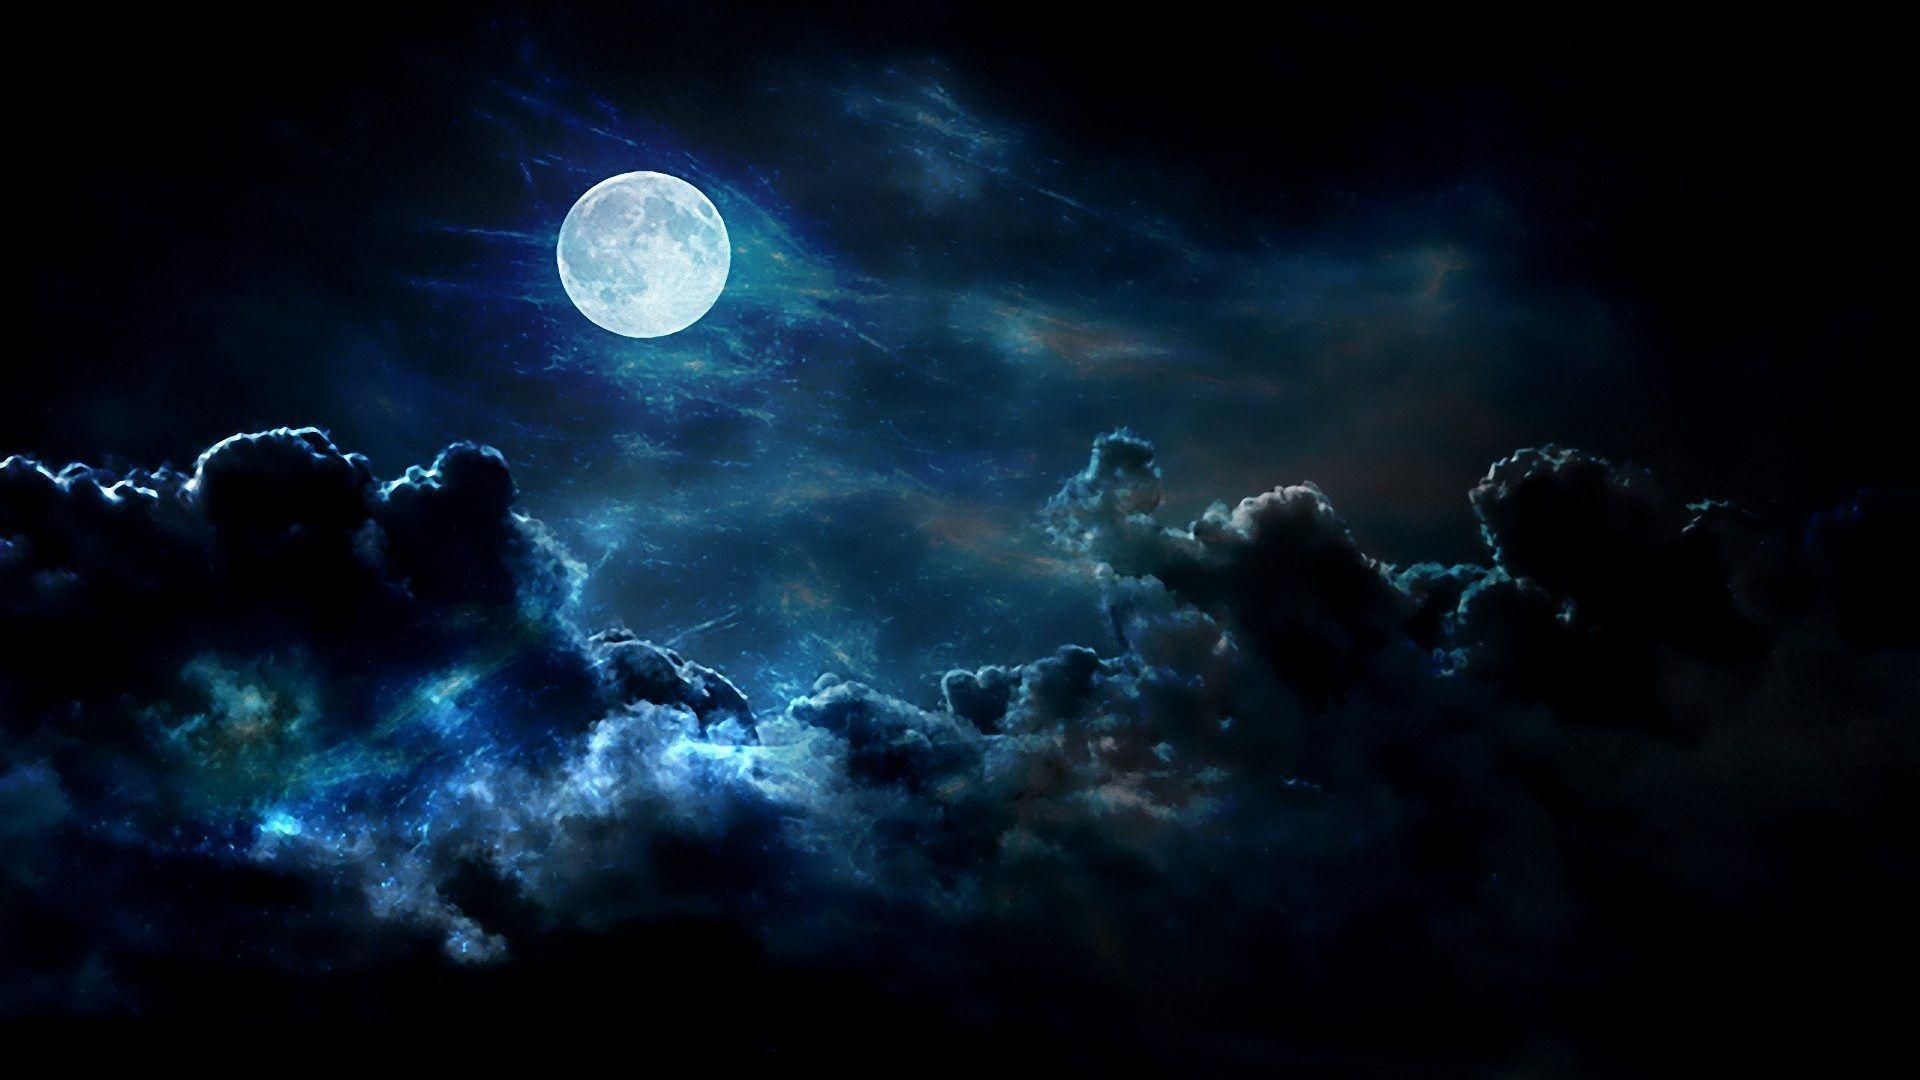 BIG BLUE Clouds Nature Night Moon SKIES FULL Wallpaper Background